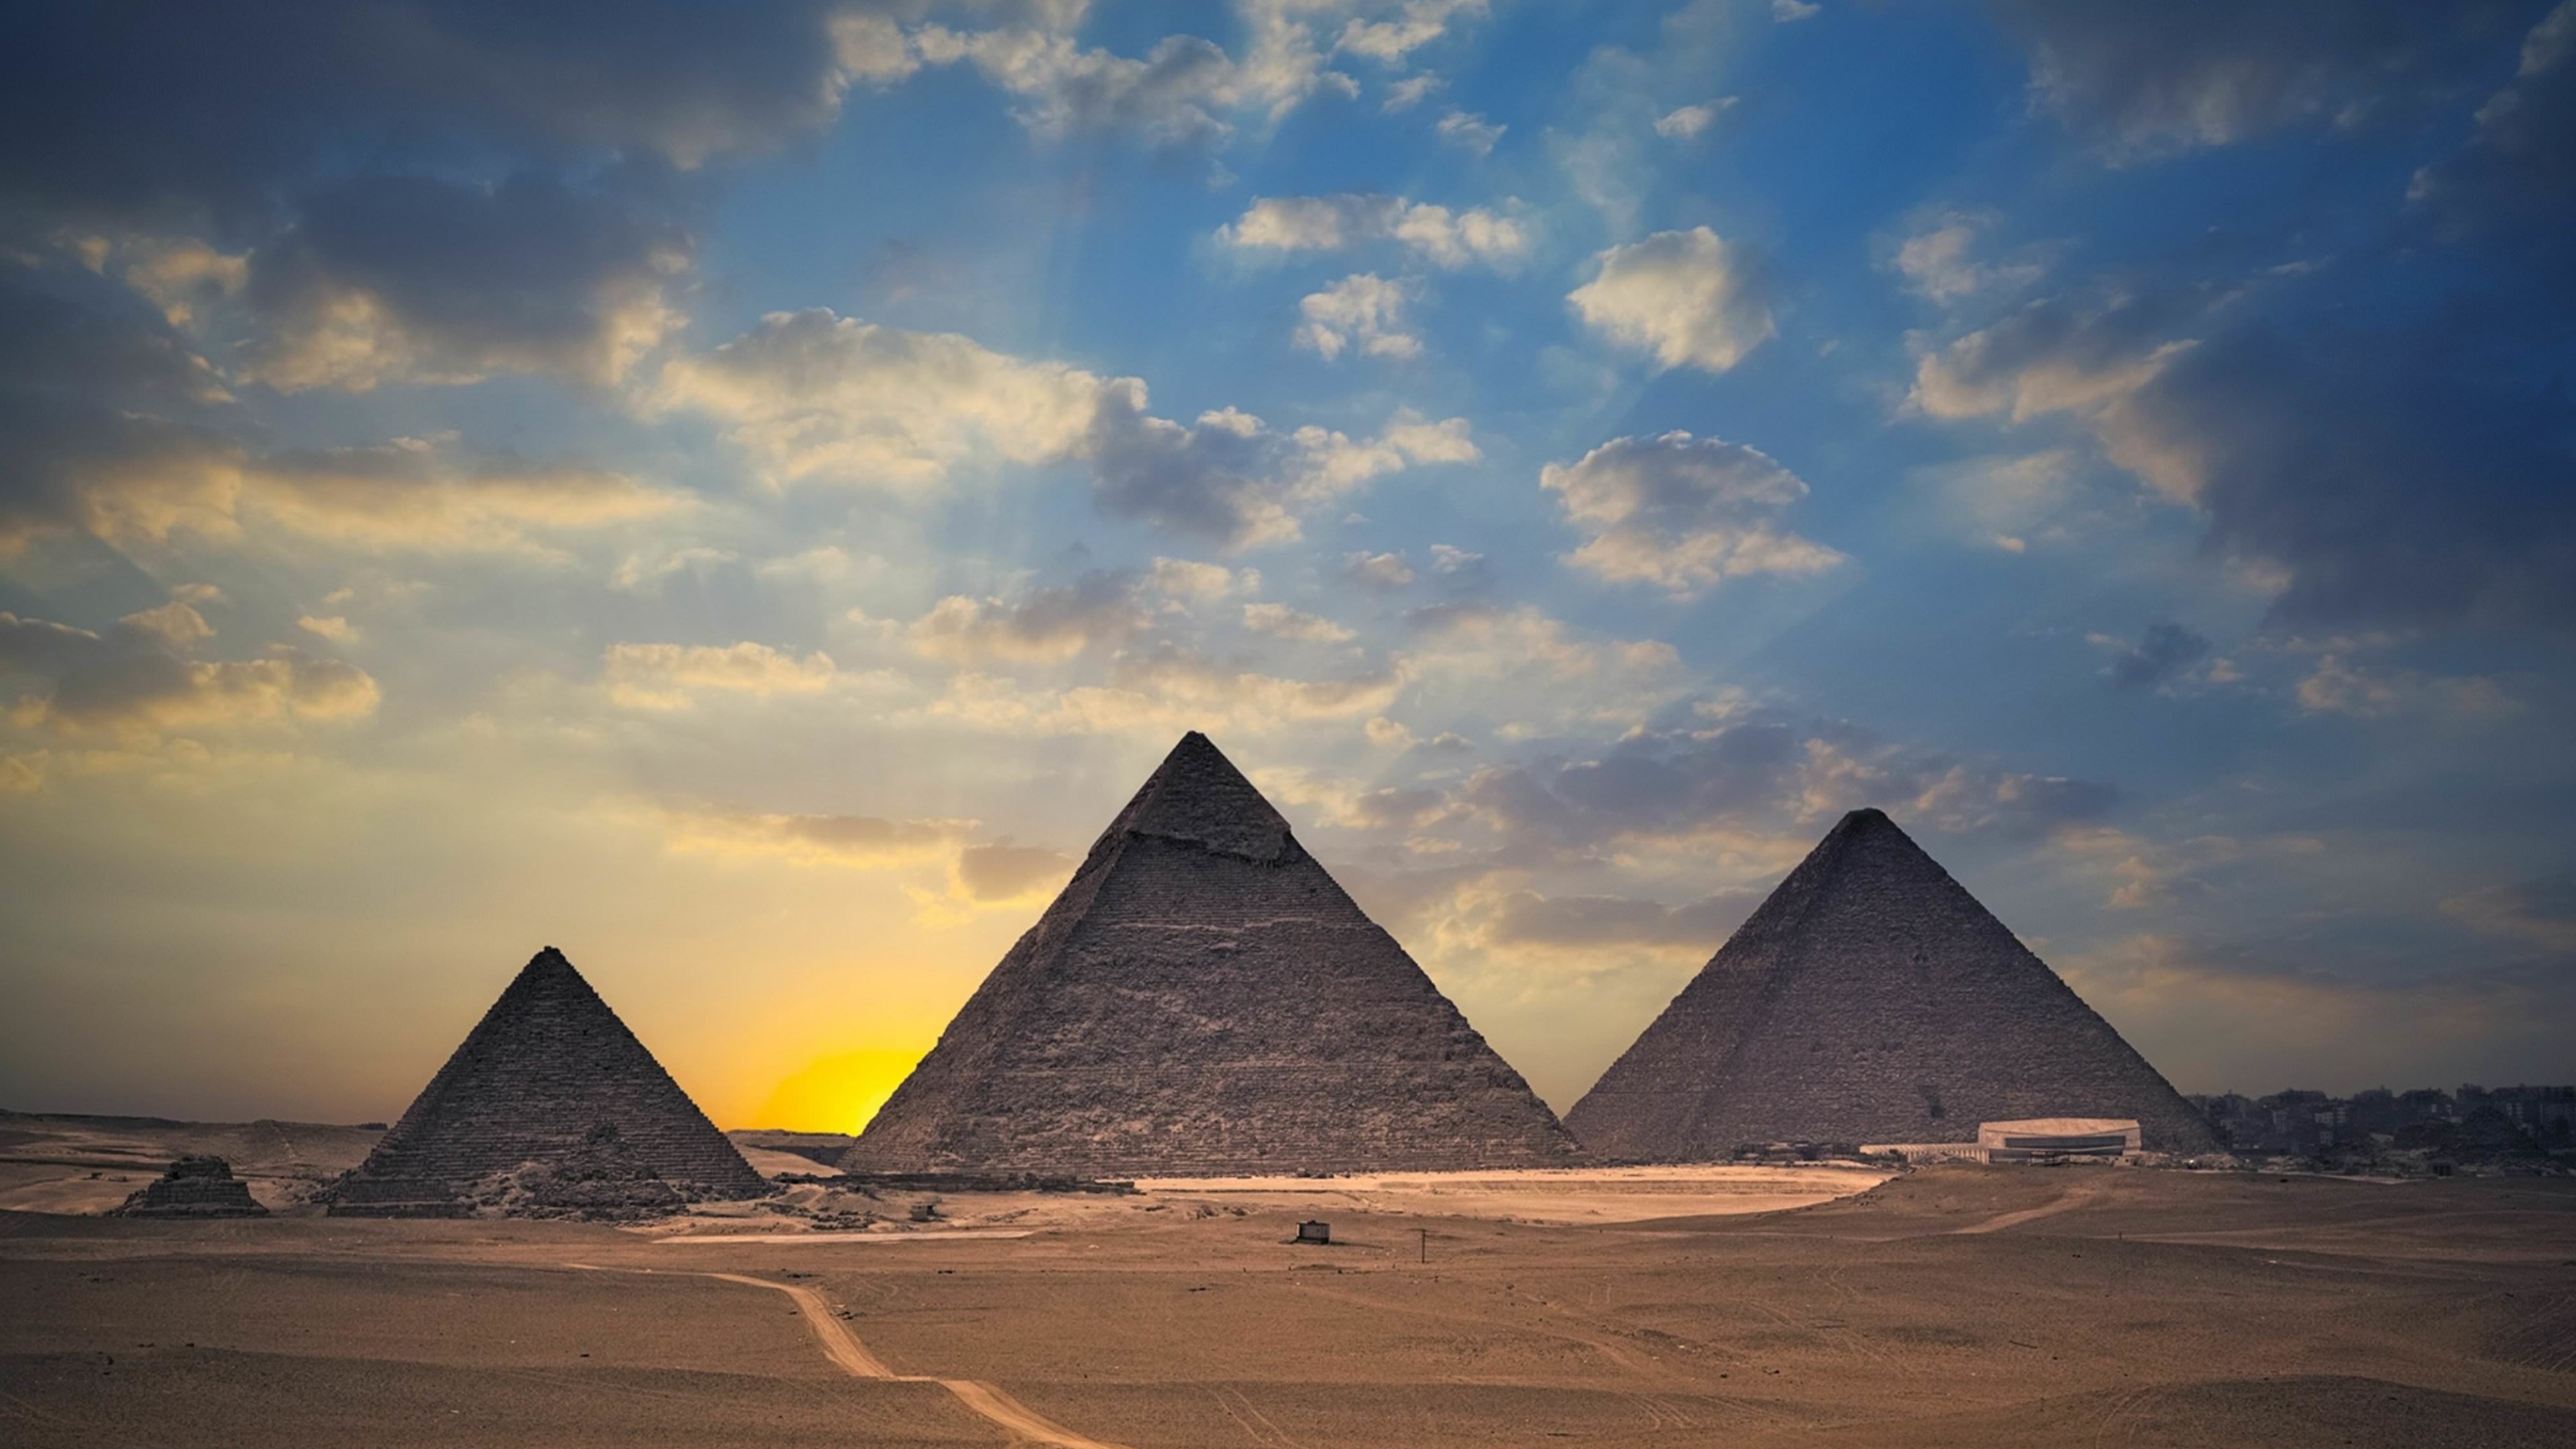 The Great Pyramids of Giza Wallpaper for Desktop 4K 3840x2160